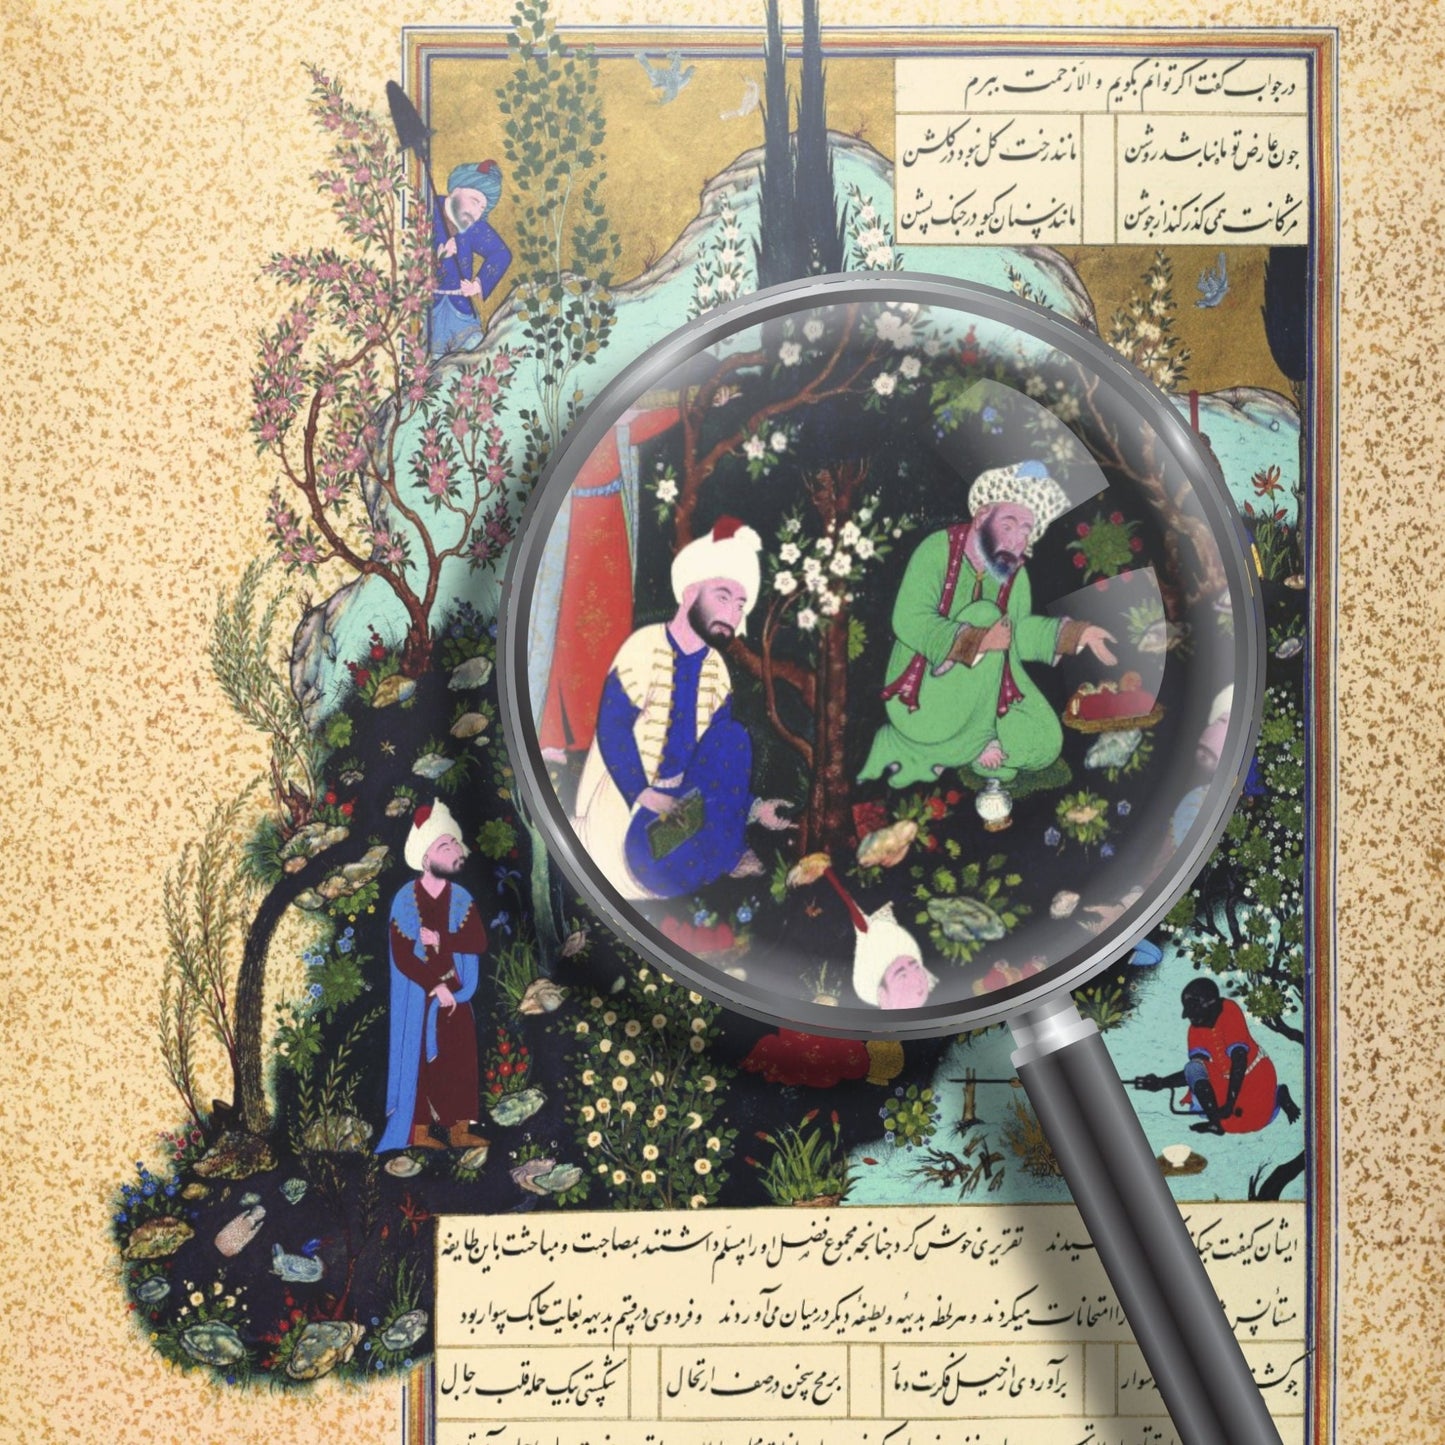 Ferdowsi and the Poets of Ghazna (Persian Miniature Art for the Shahnameh)